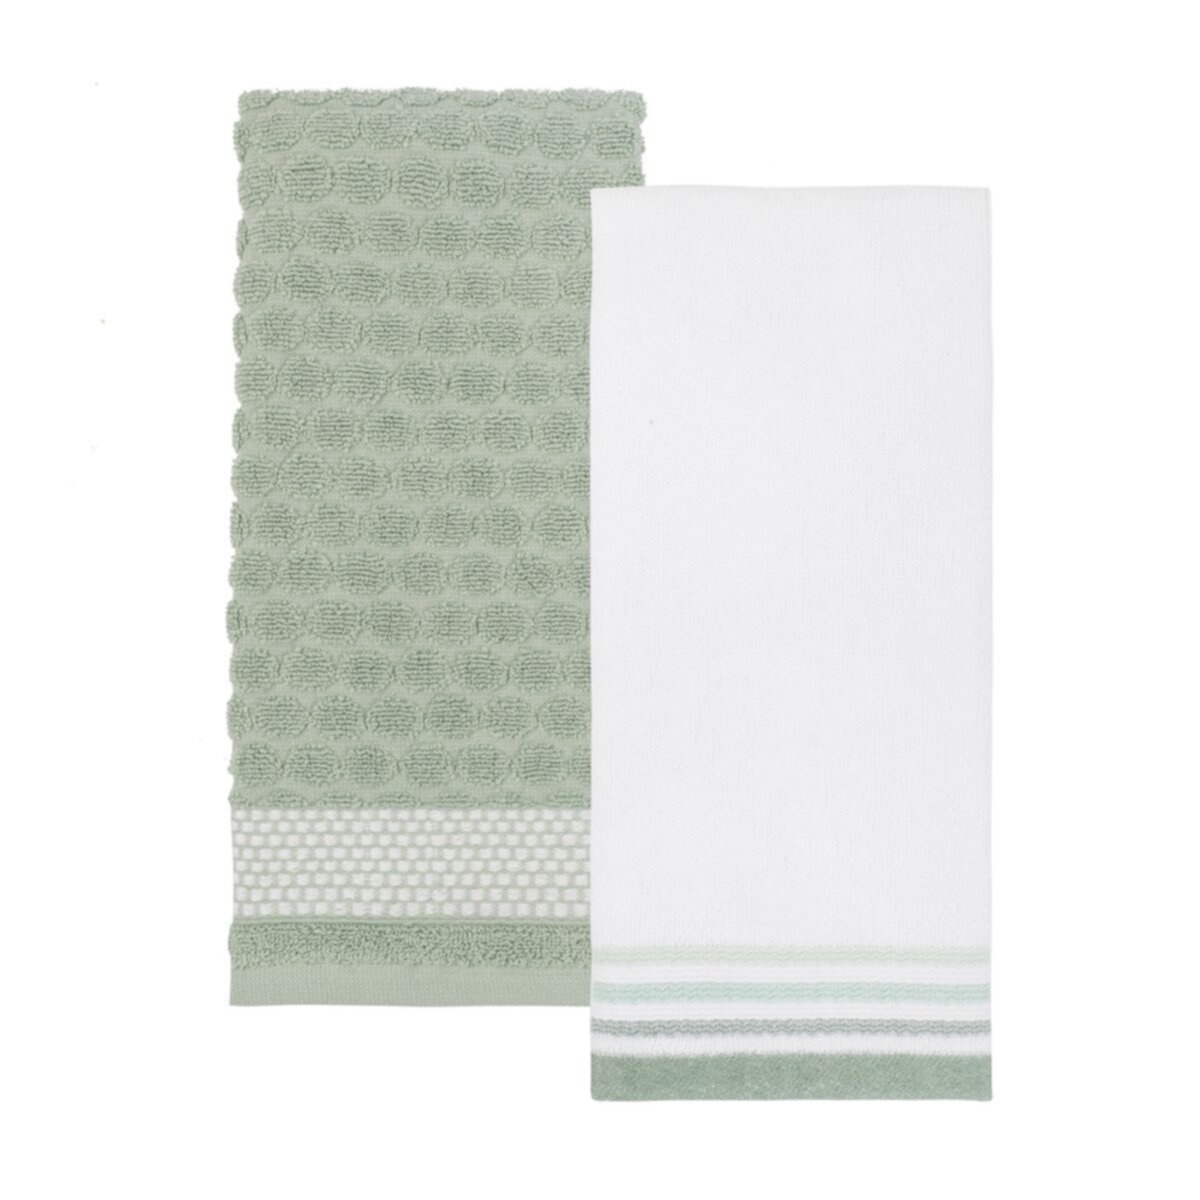 The Big One® Green Textured 2-Pack Hand Towels The Big One